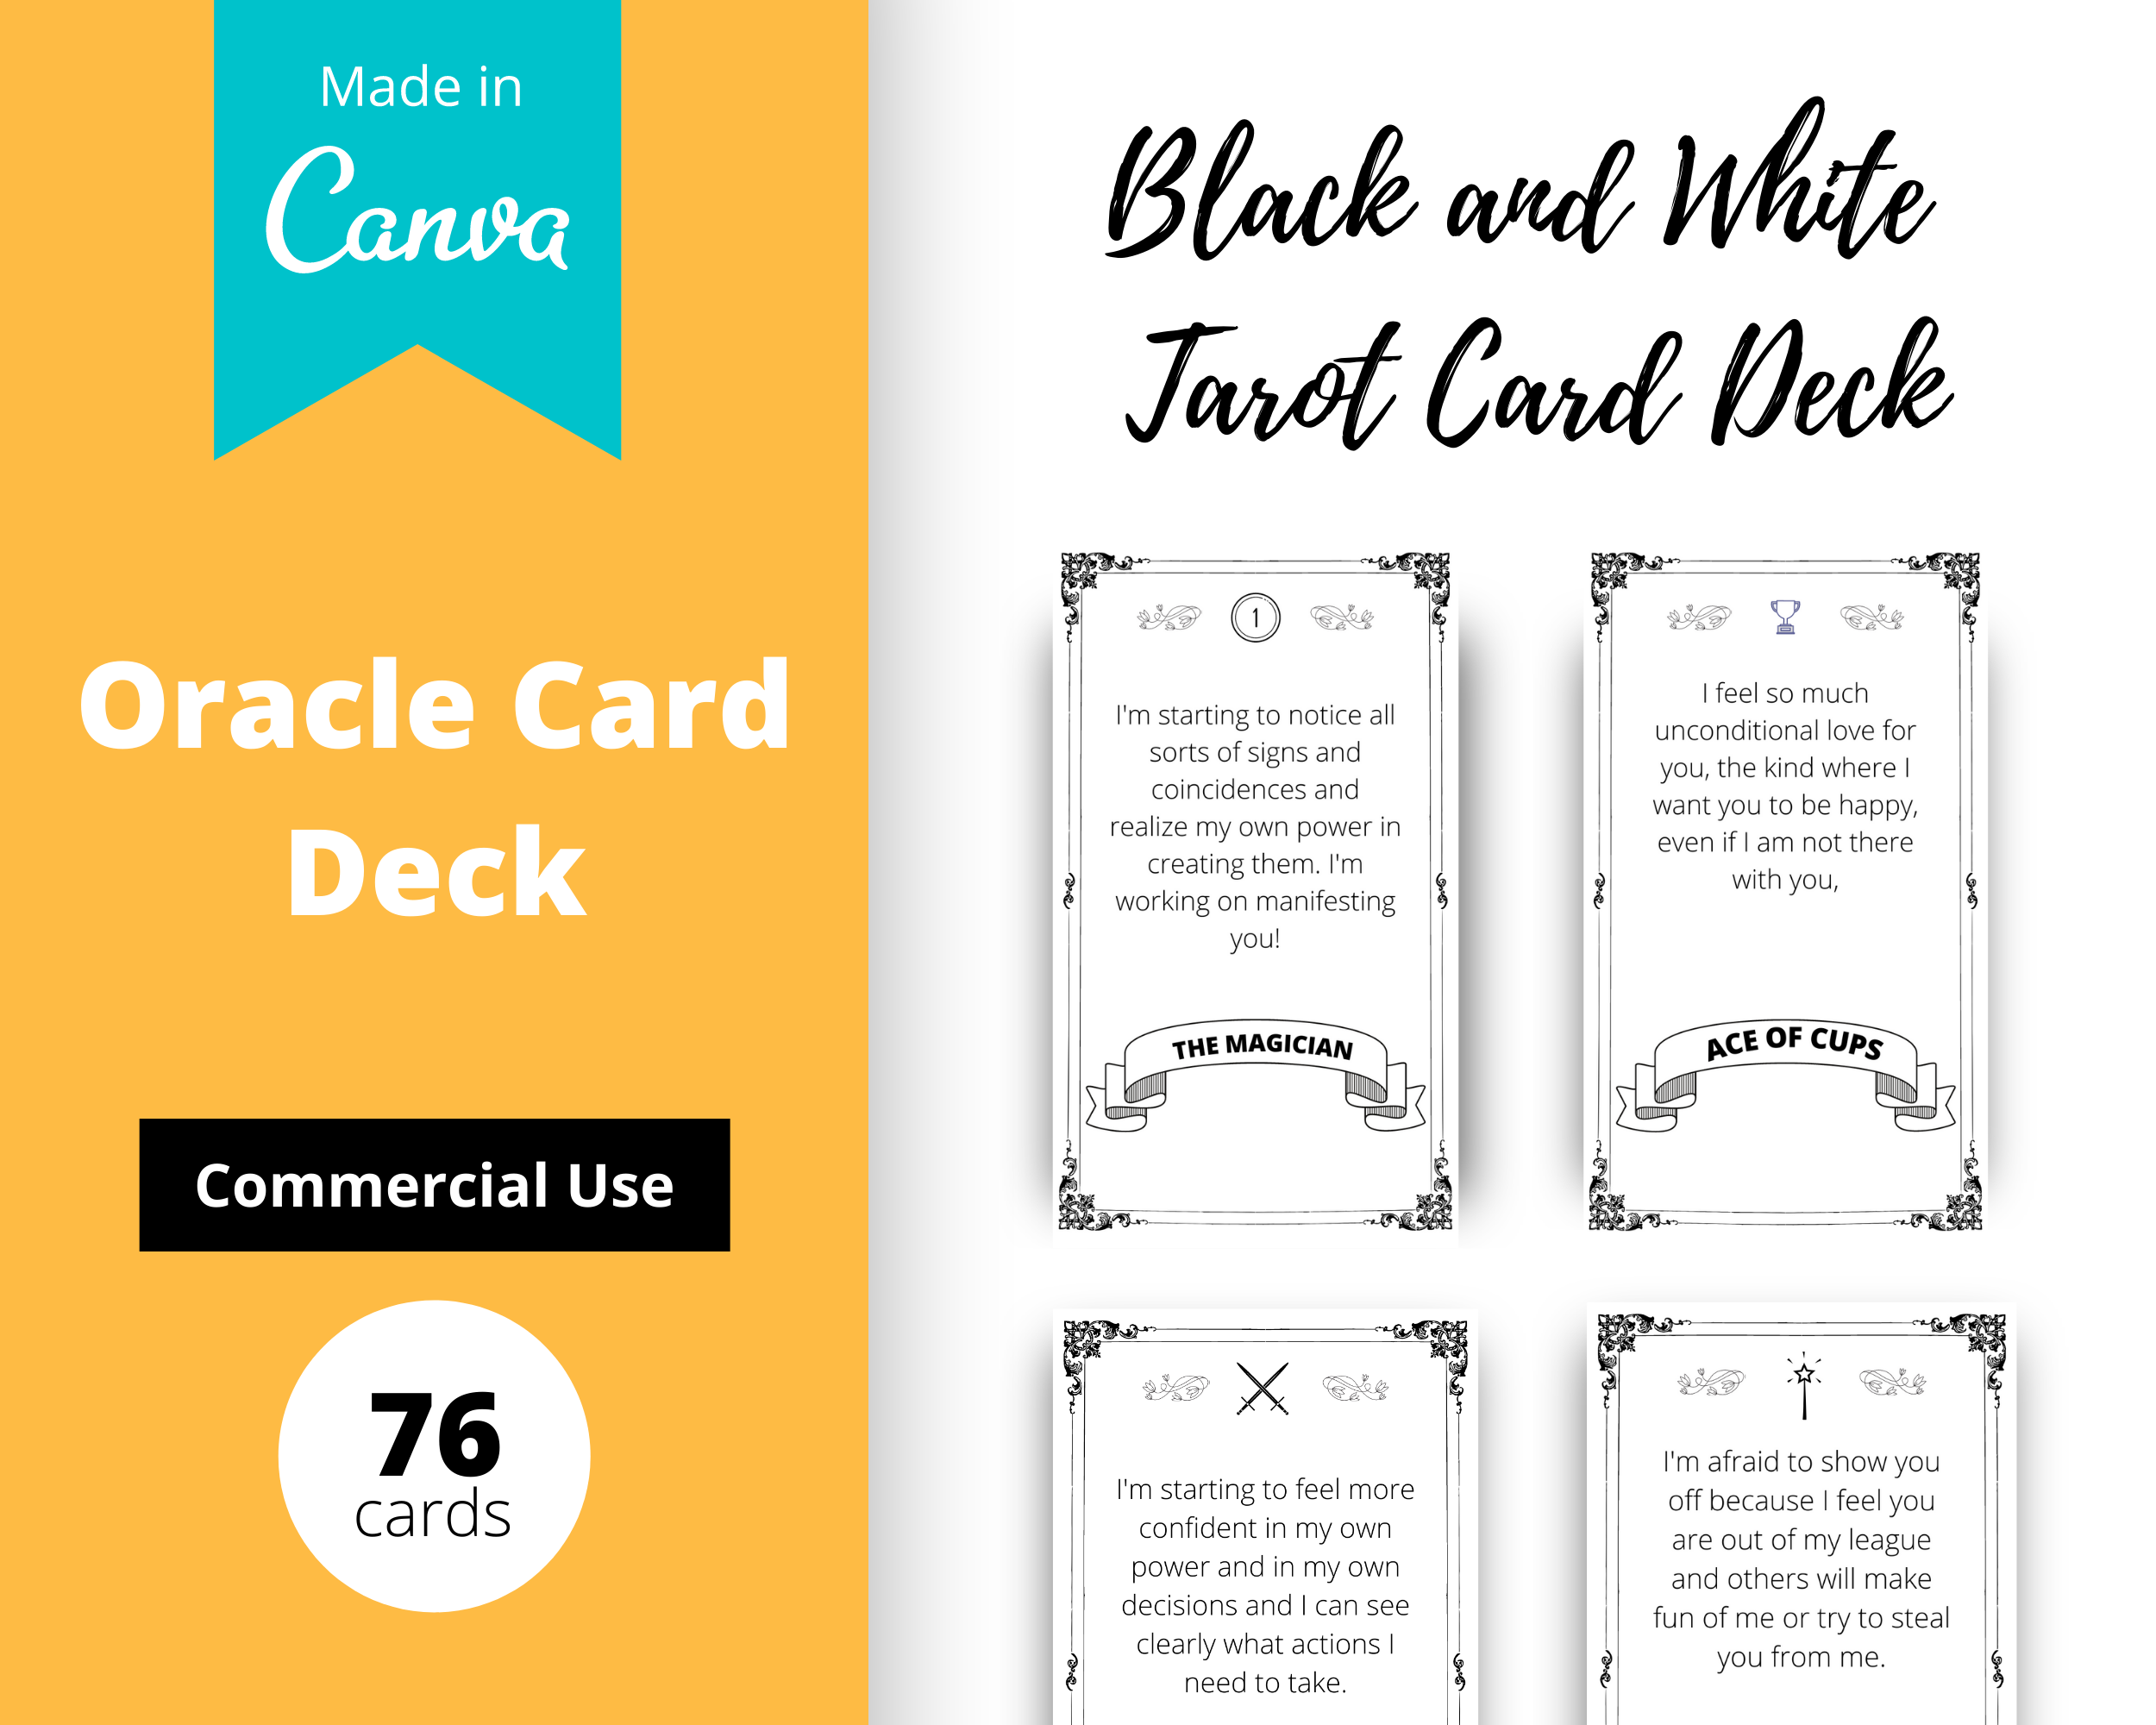 Black & White Tarot Card Deck | Editable 76 Card Deck in Canva | Size 2.75"x 4.75" | Commercial Use